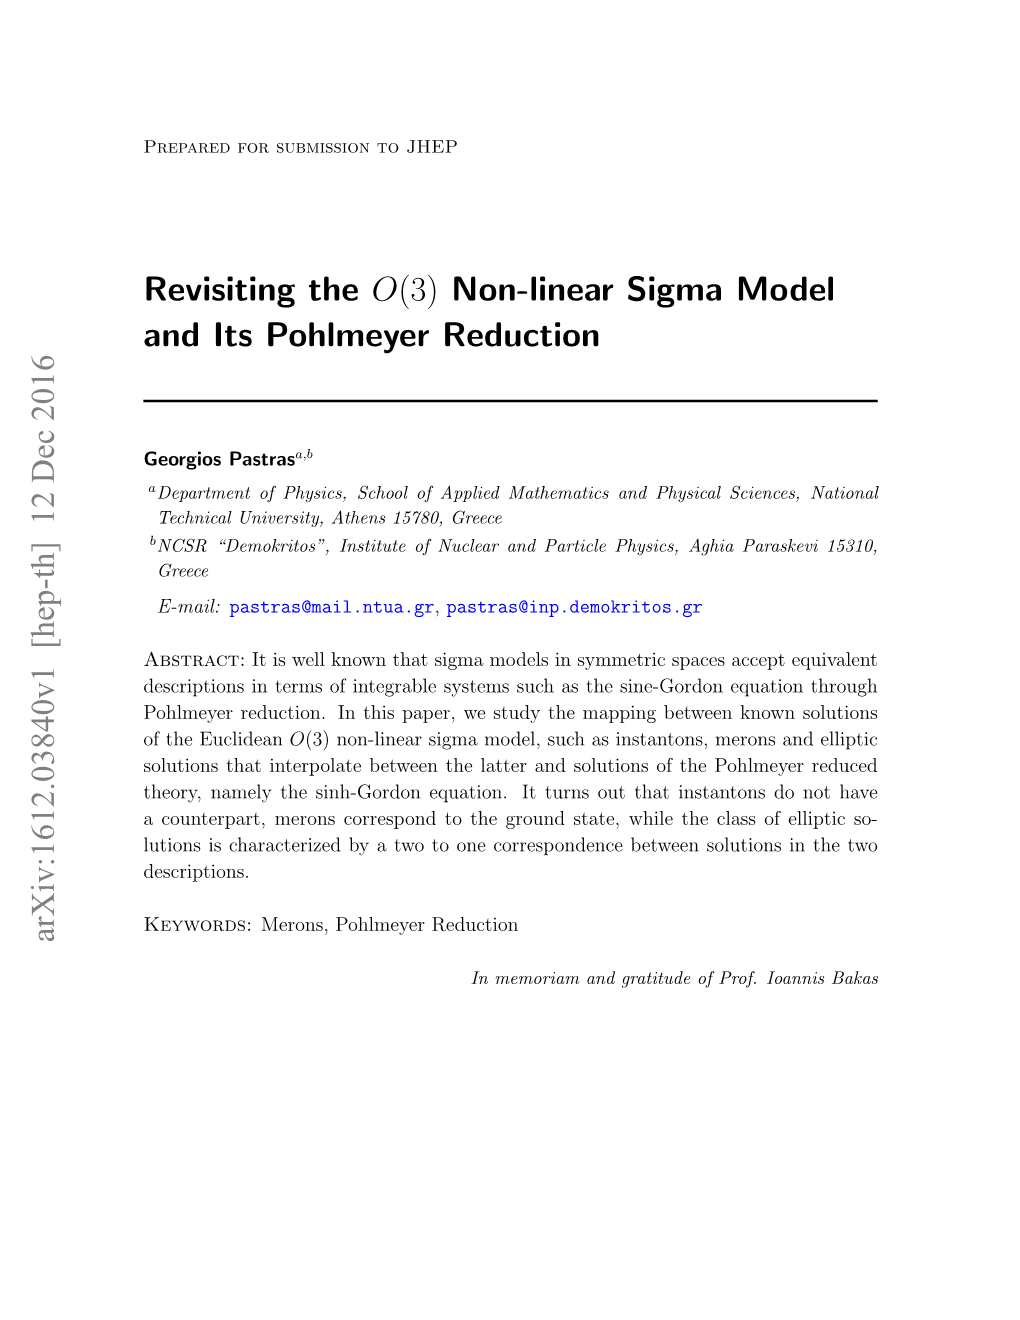 Revisiting the O(3) Non-Linear Sigma Model and Its Pohlmeyer Reduction